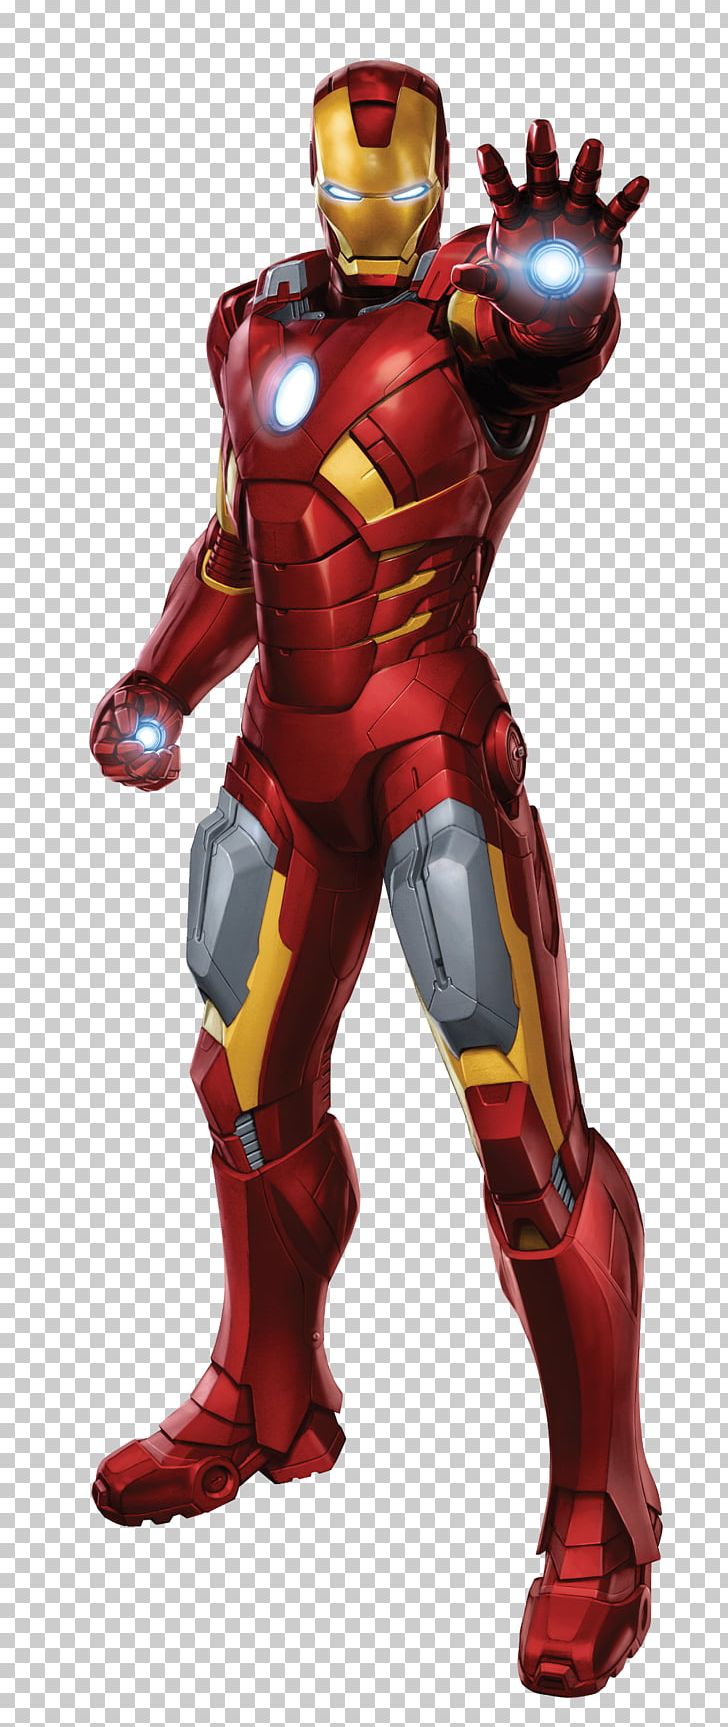 Iron Man Clint Barton Captain America Marvel Cinematic Universe Film PNG, Clipart, Action Figure, Action Toy Figures, Avengers, Avengers Age Of Ultron, Avengers Infinity War Free PNG Download